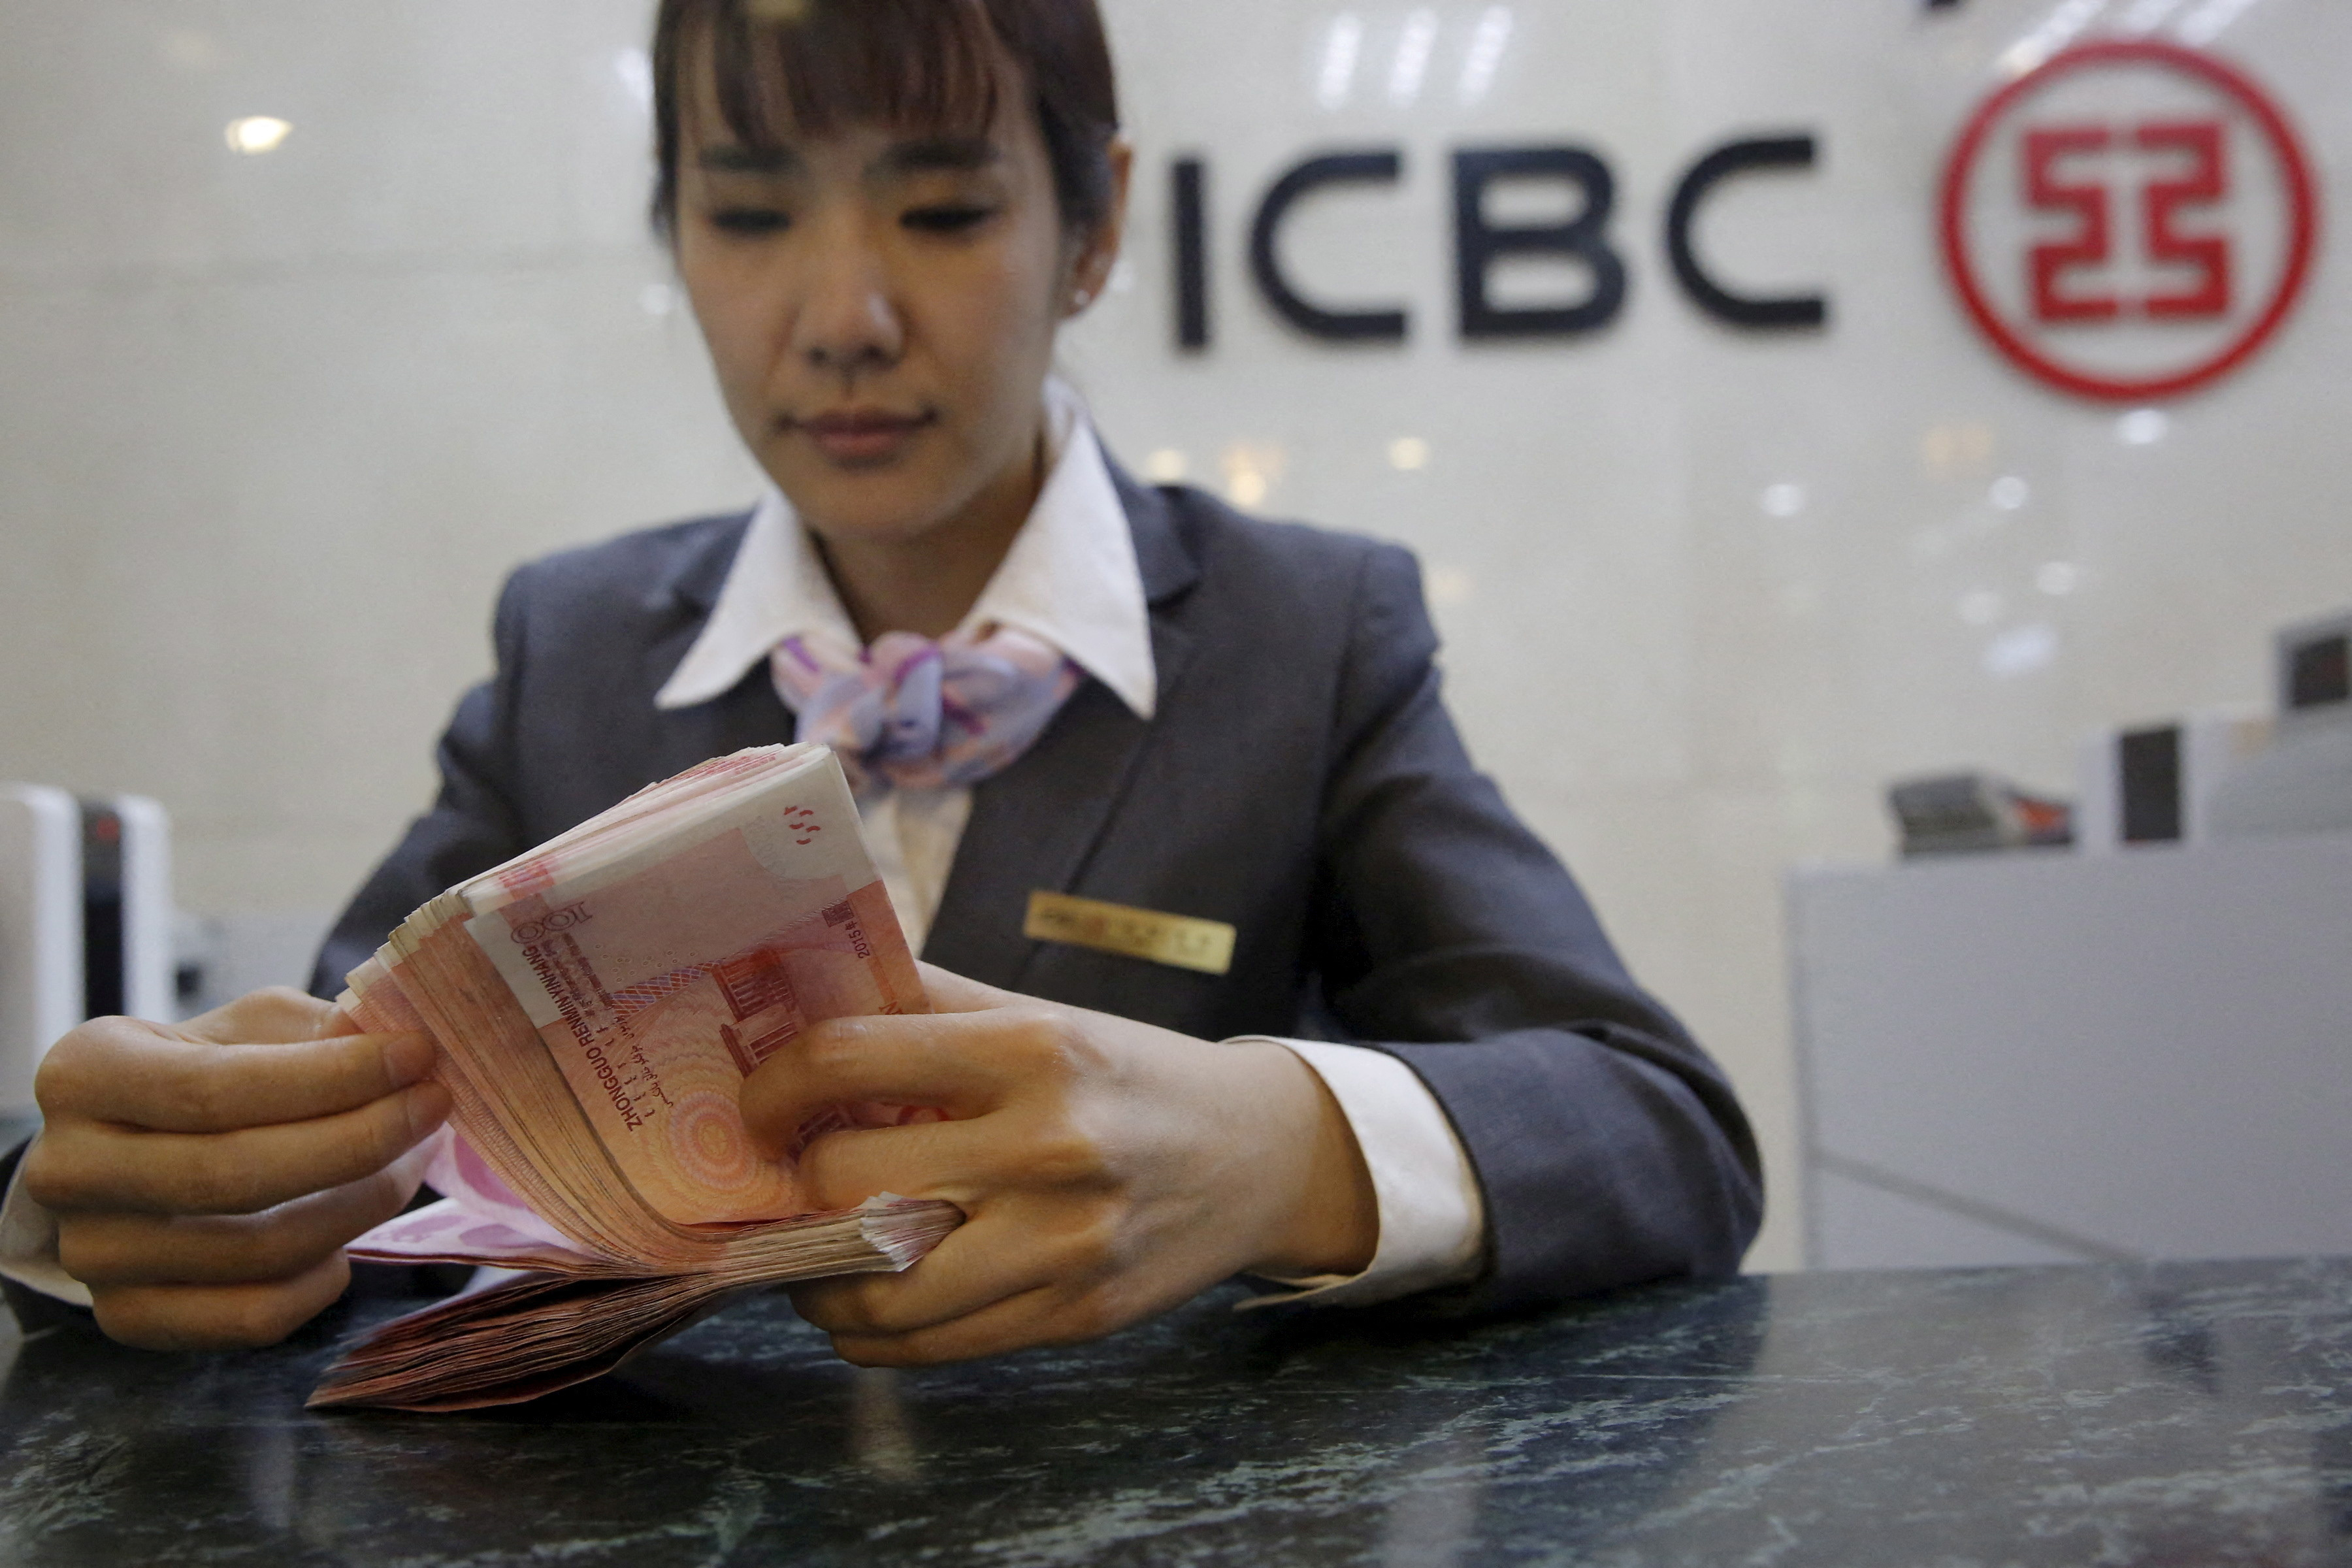 FILE PHOTO: A clerk of ICBC bank counts Chinese one hundred Yuan Banknotes as she poses for camera during a photo opportunity at its branch in Beijing